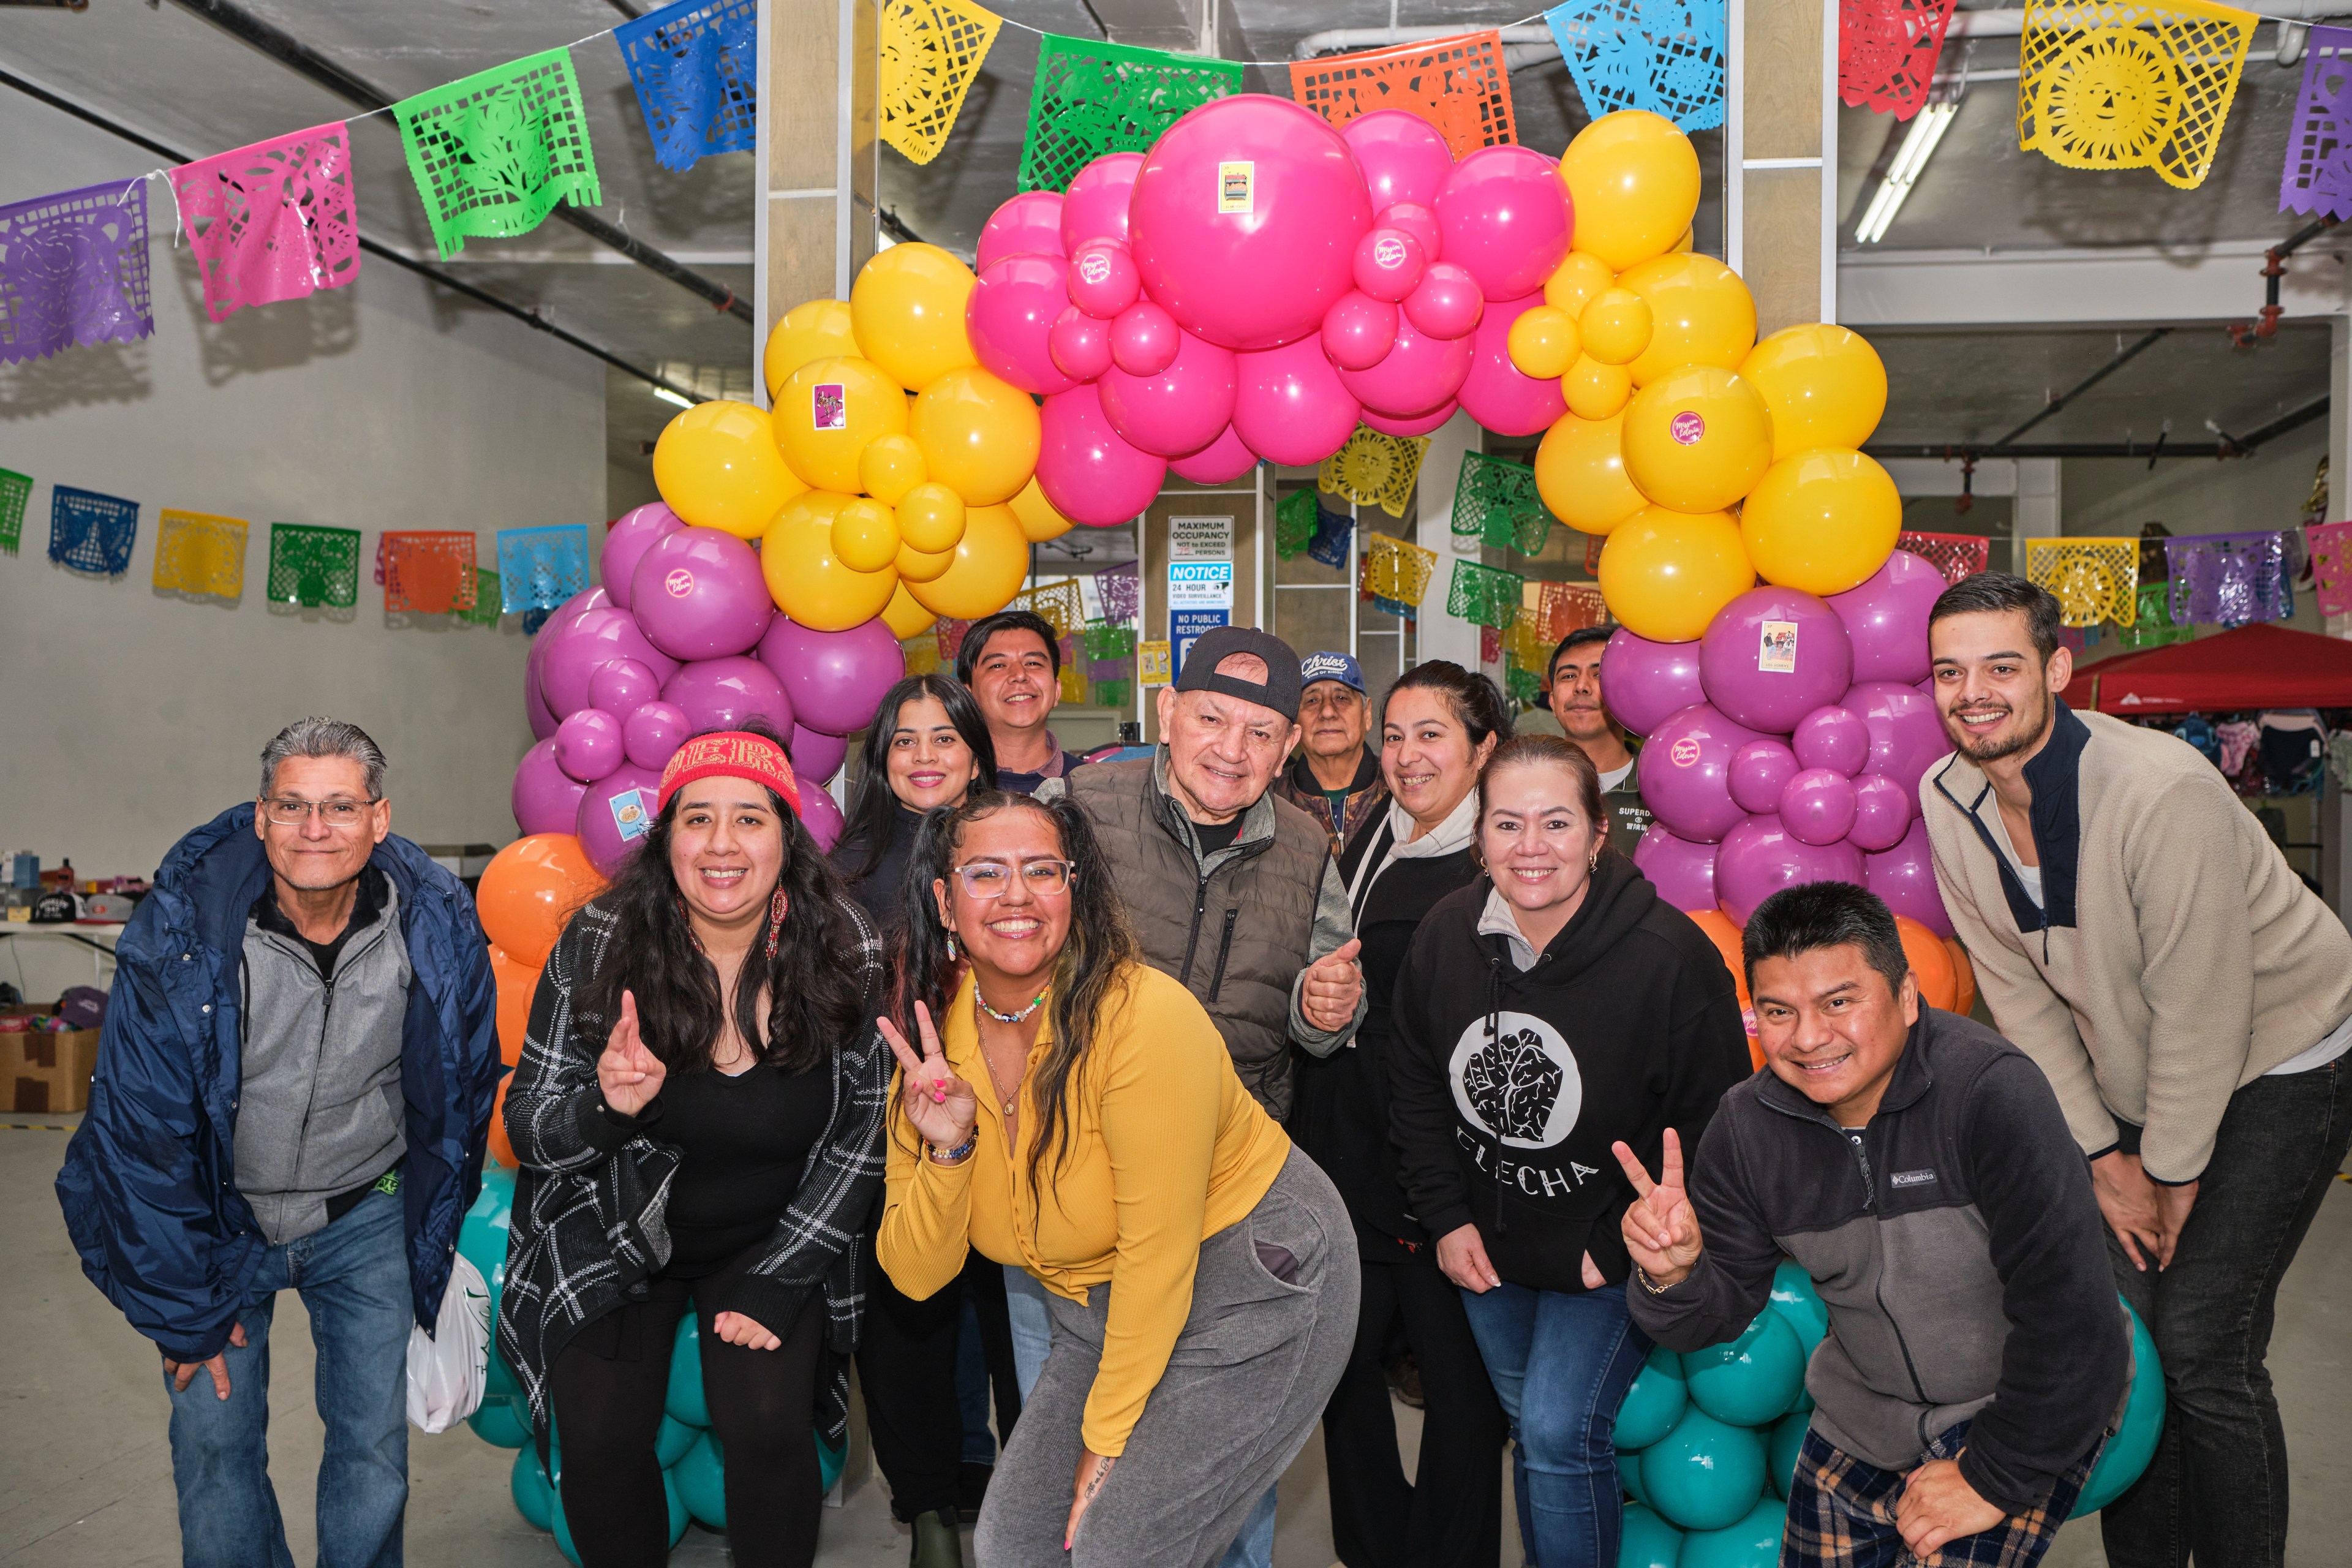 A group of smiling people posing at a festive gathering with colorful balloons and decorative paper in the background.